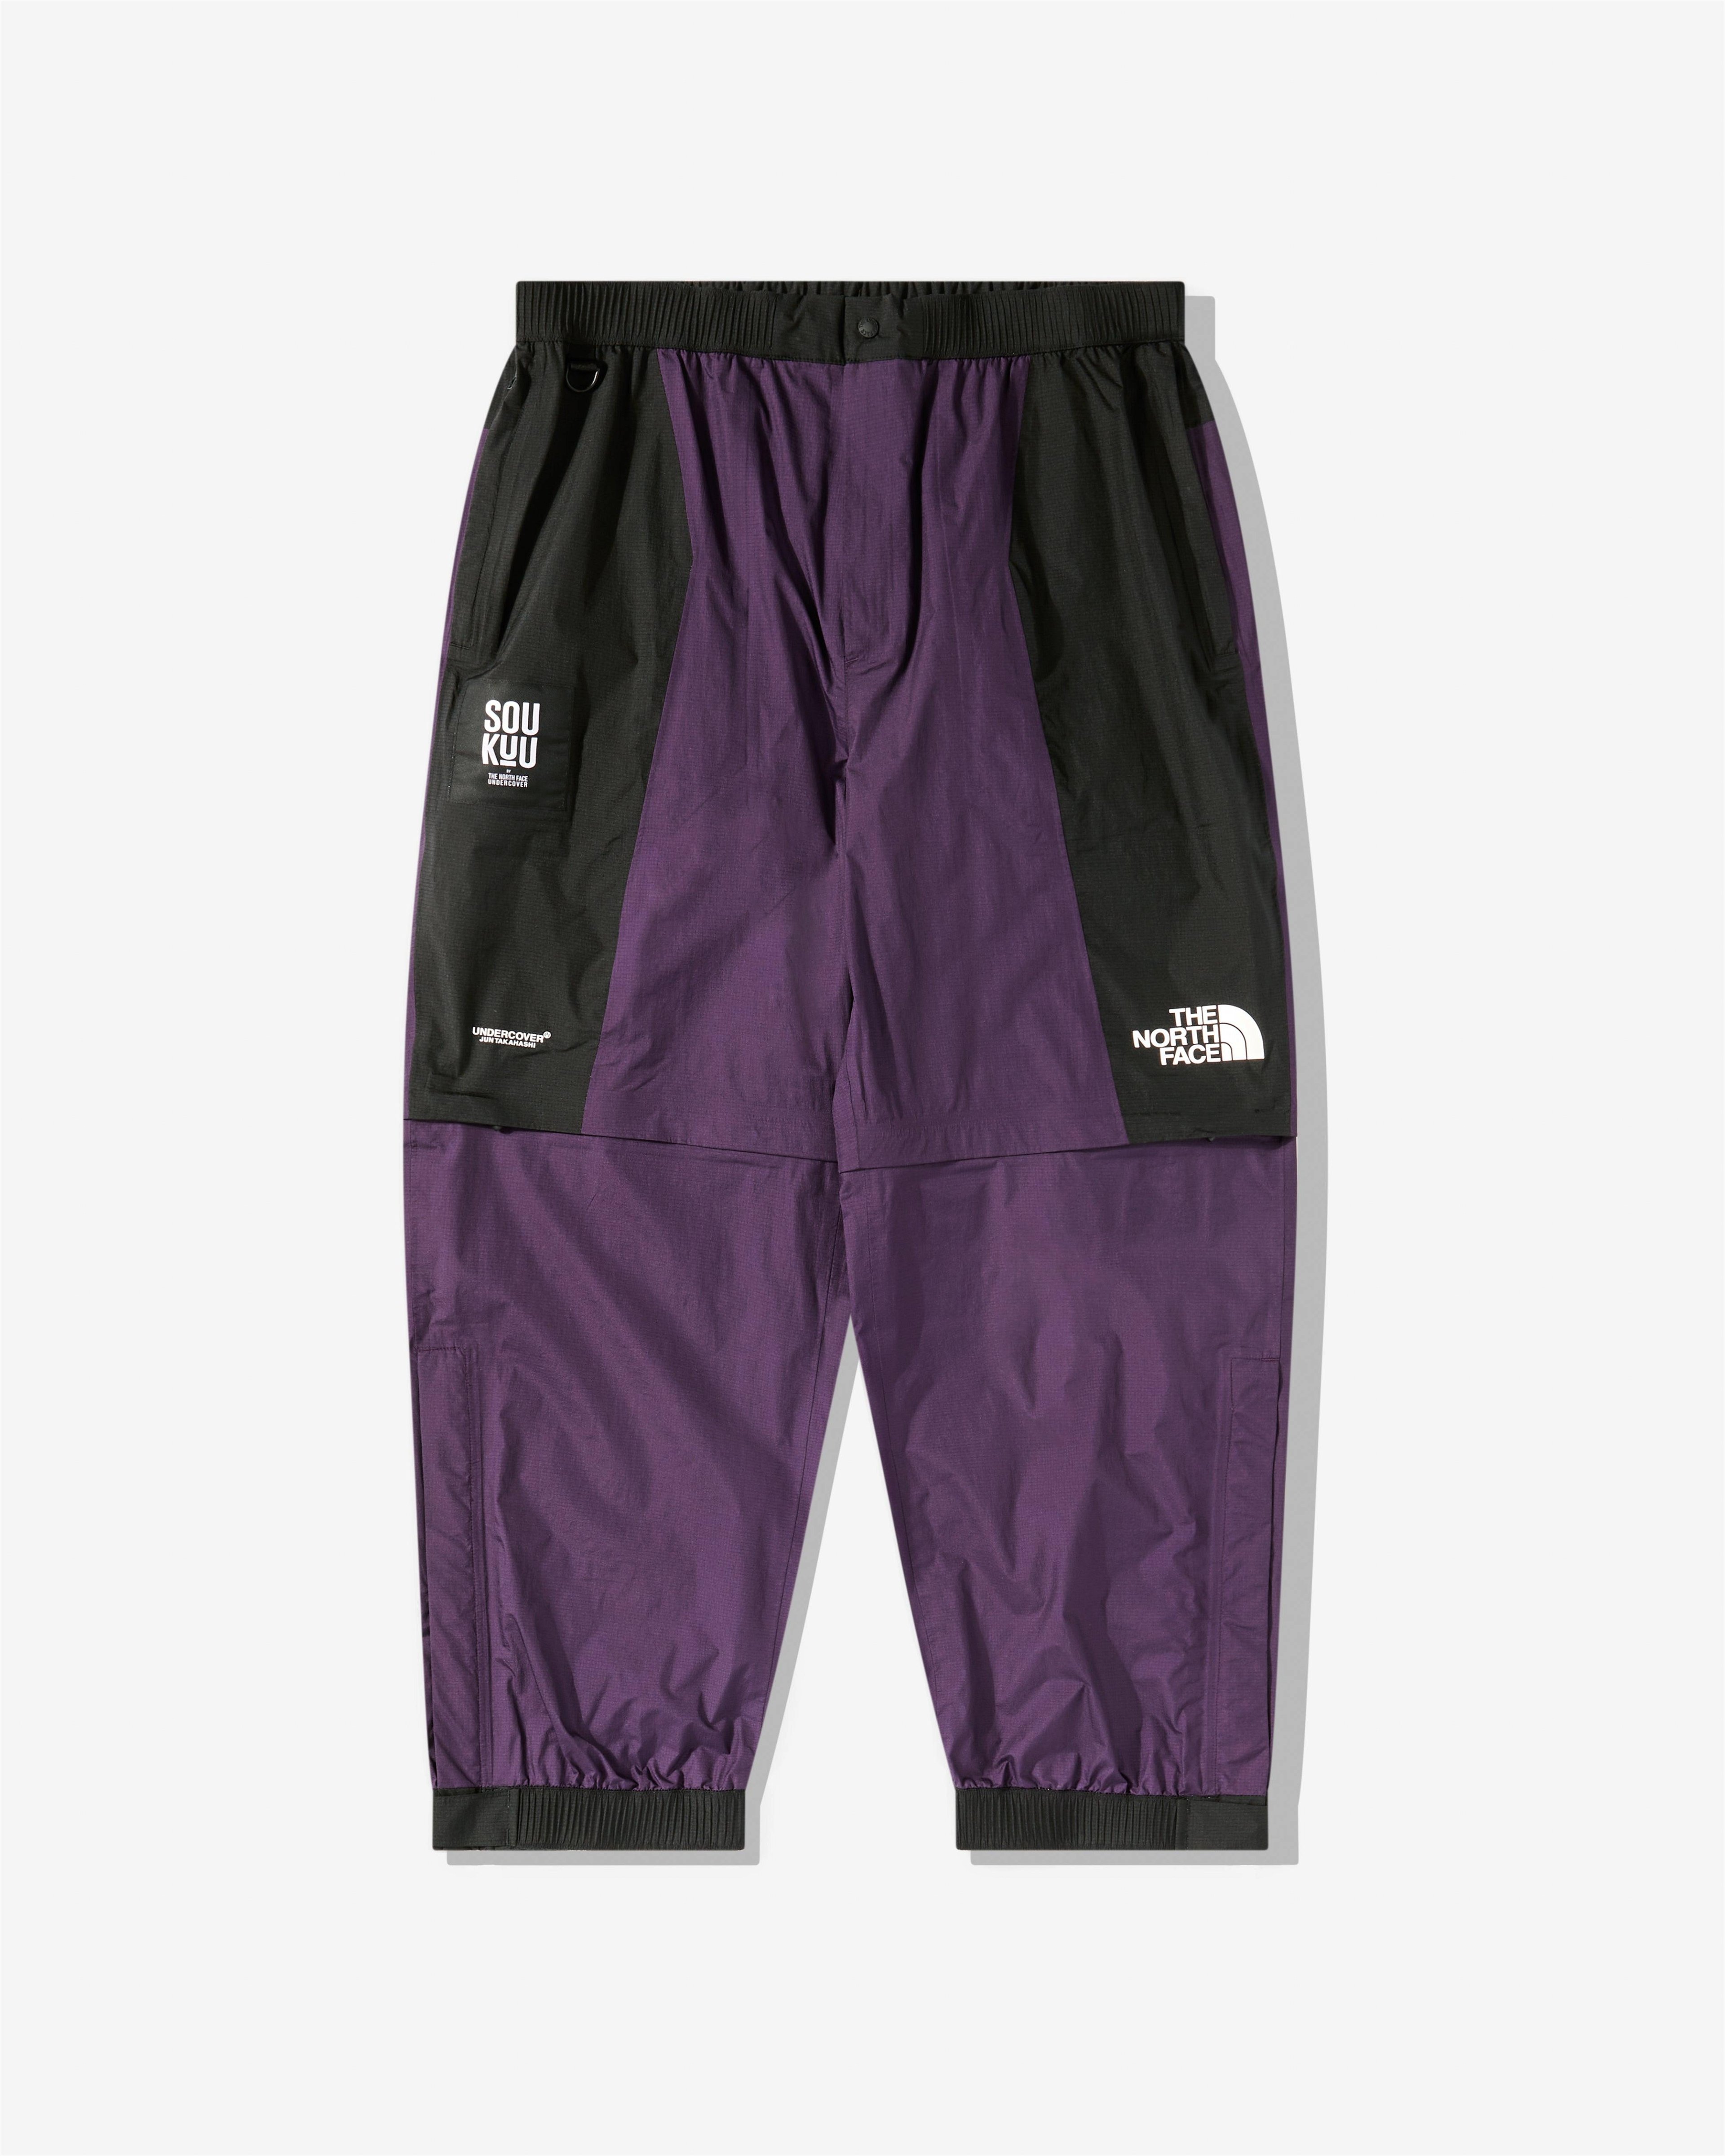 The North Face - Undercover Soukuu Hike Convertible Shell - (Purple) by THE NORTH FACE